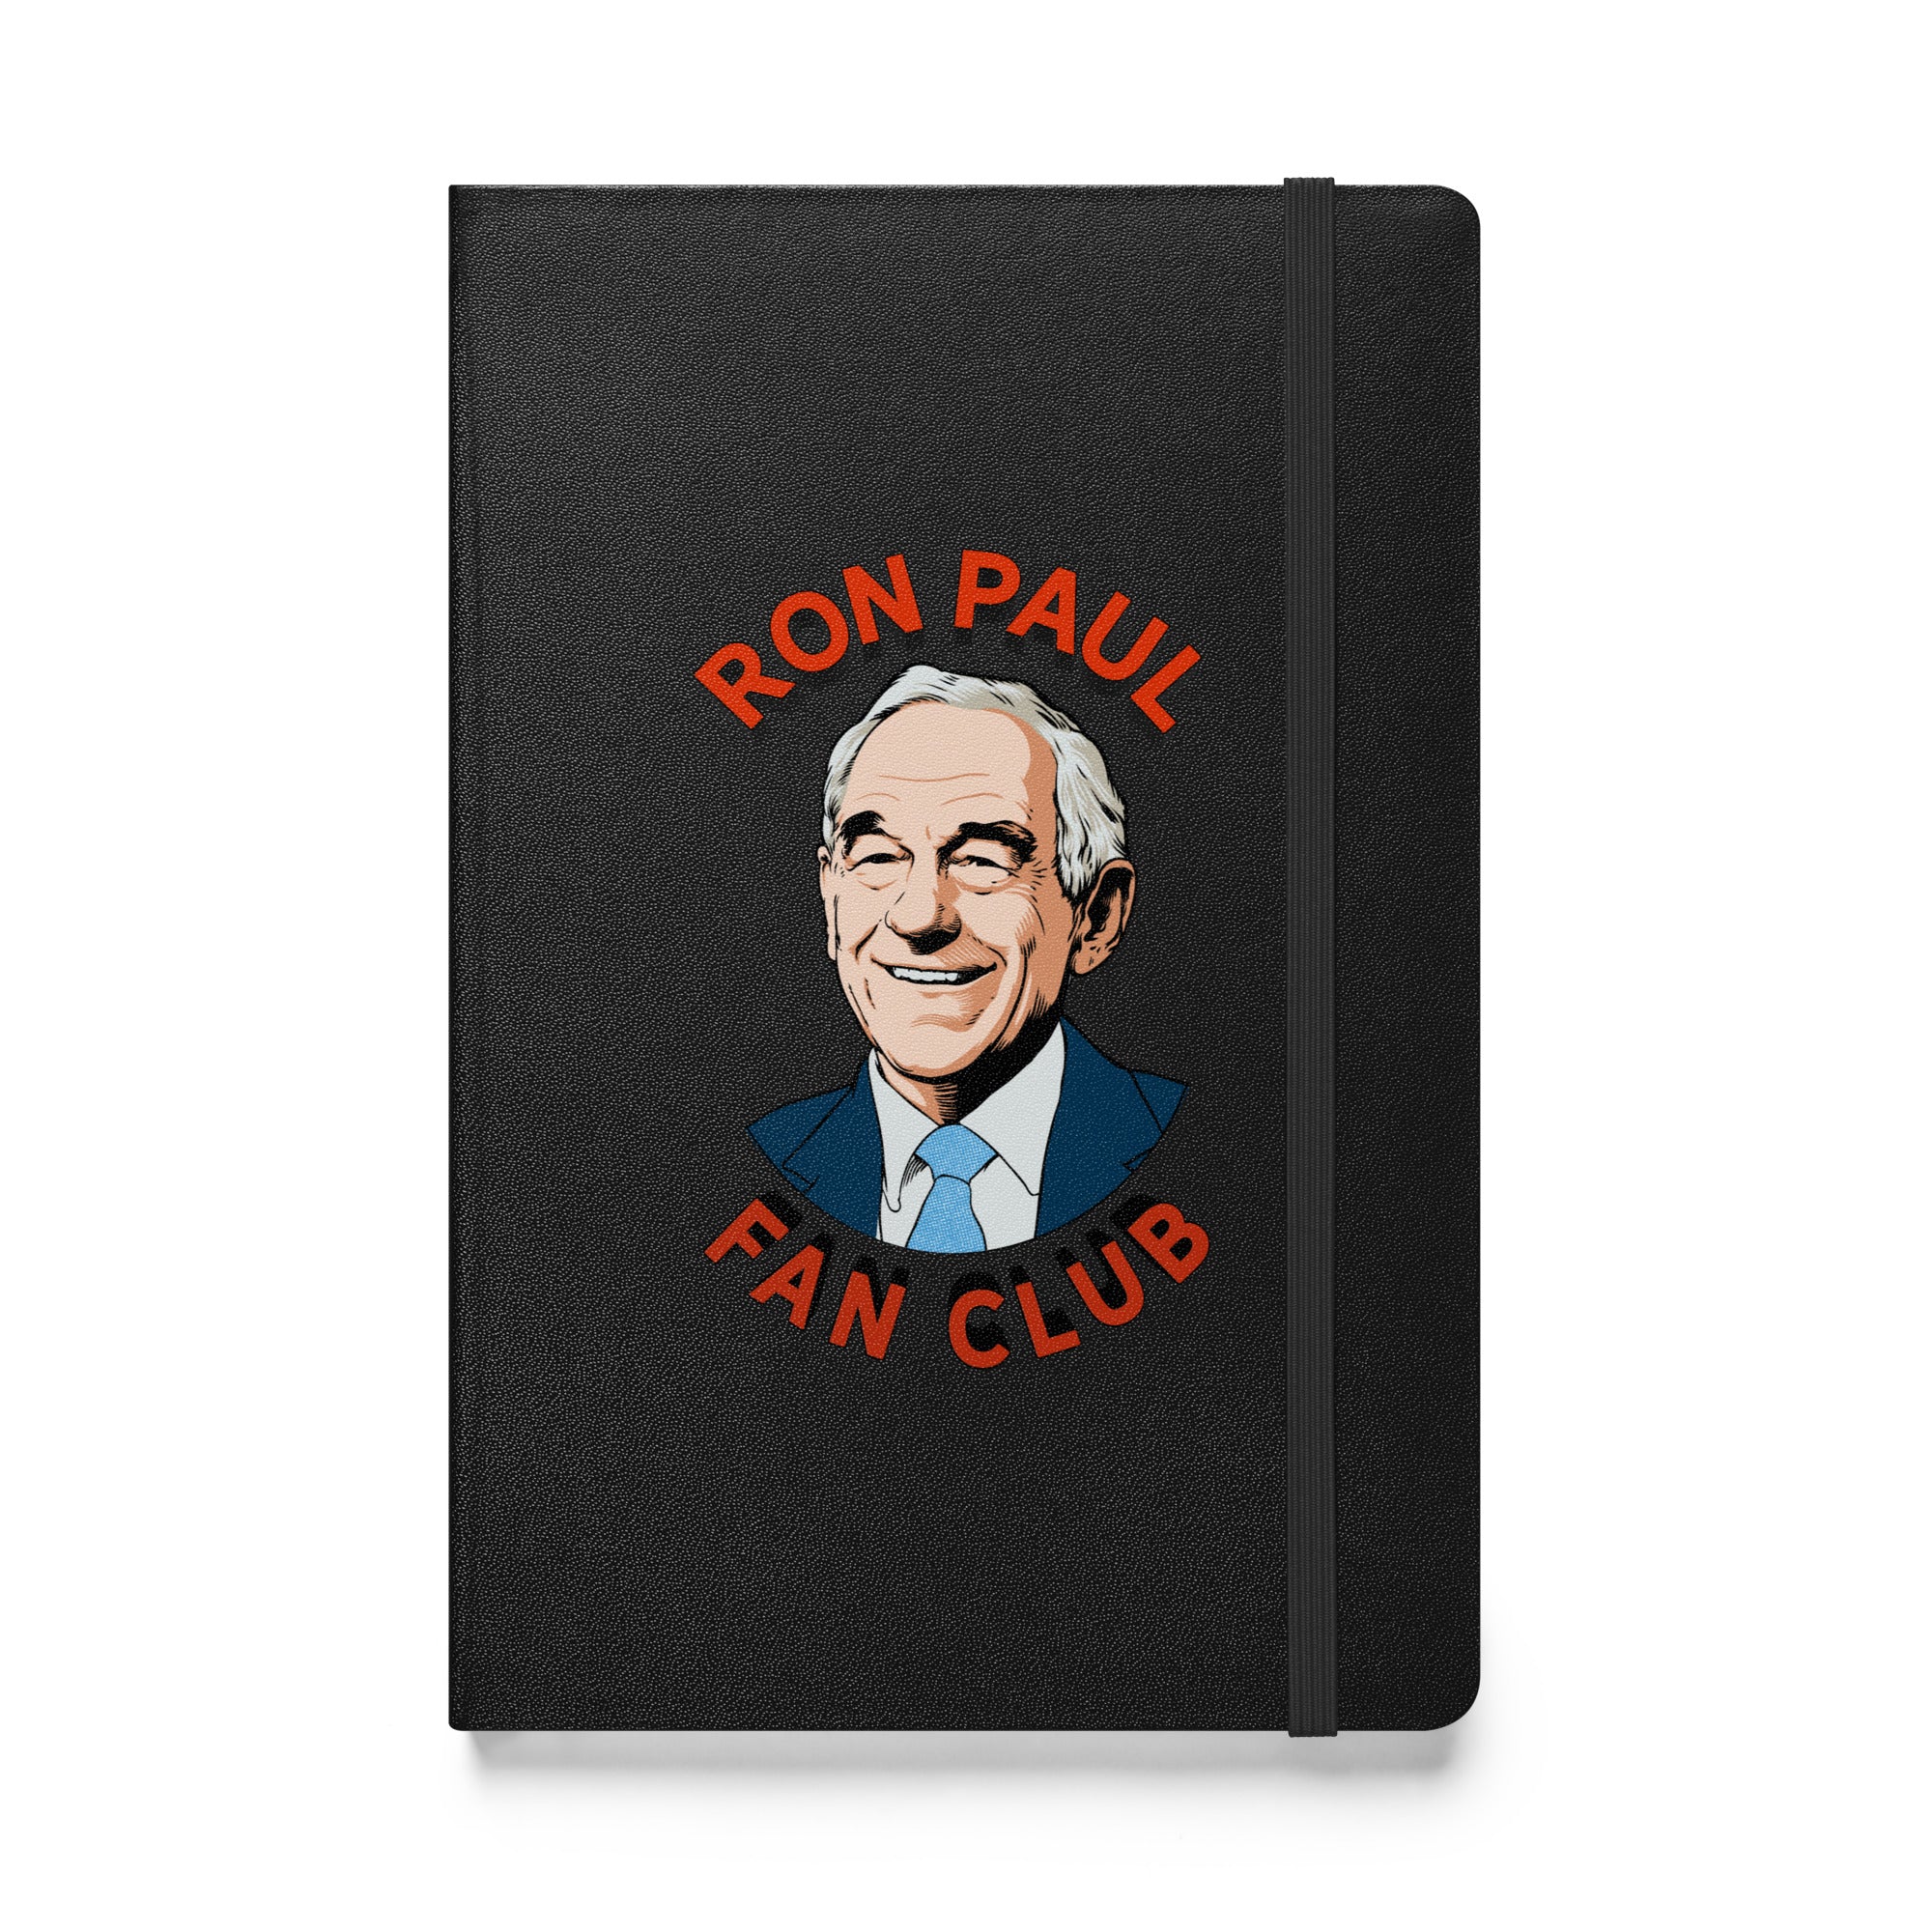 Ron Paul Fan Club Hardcover Bound Notebook